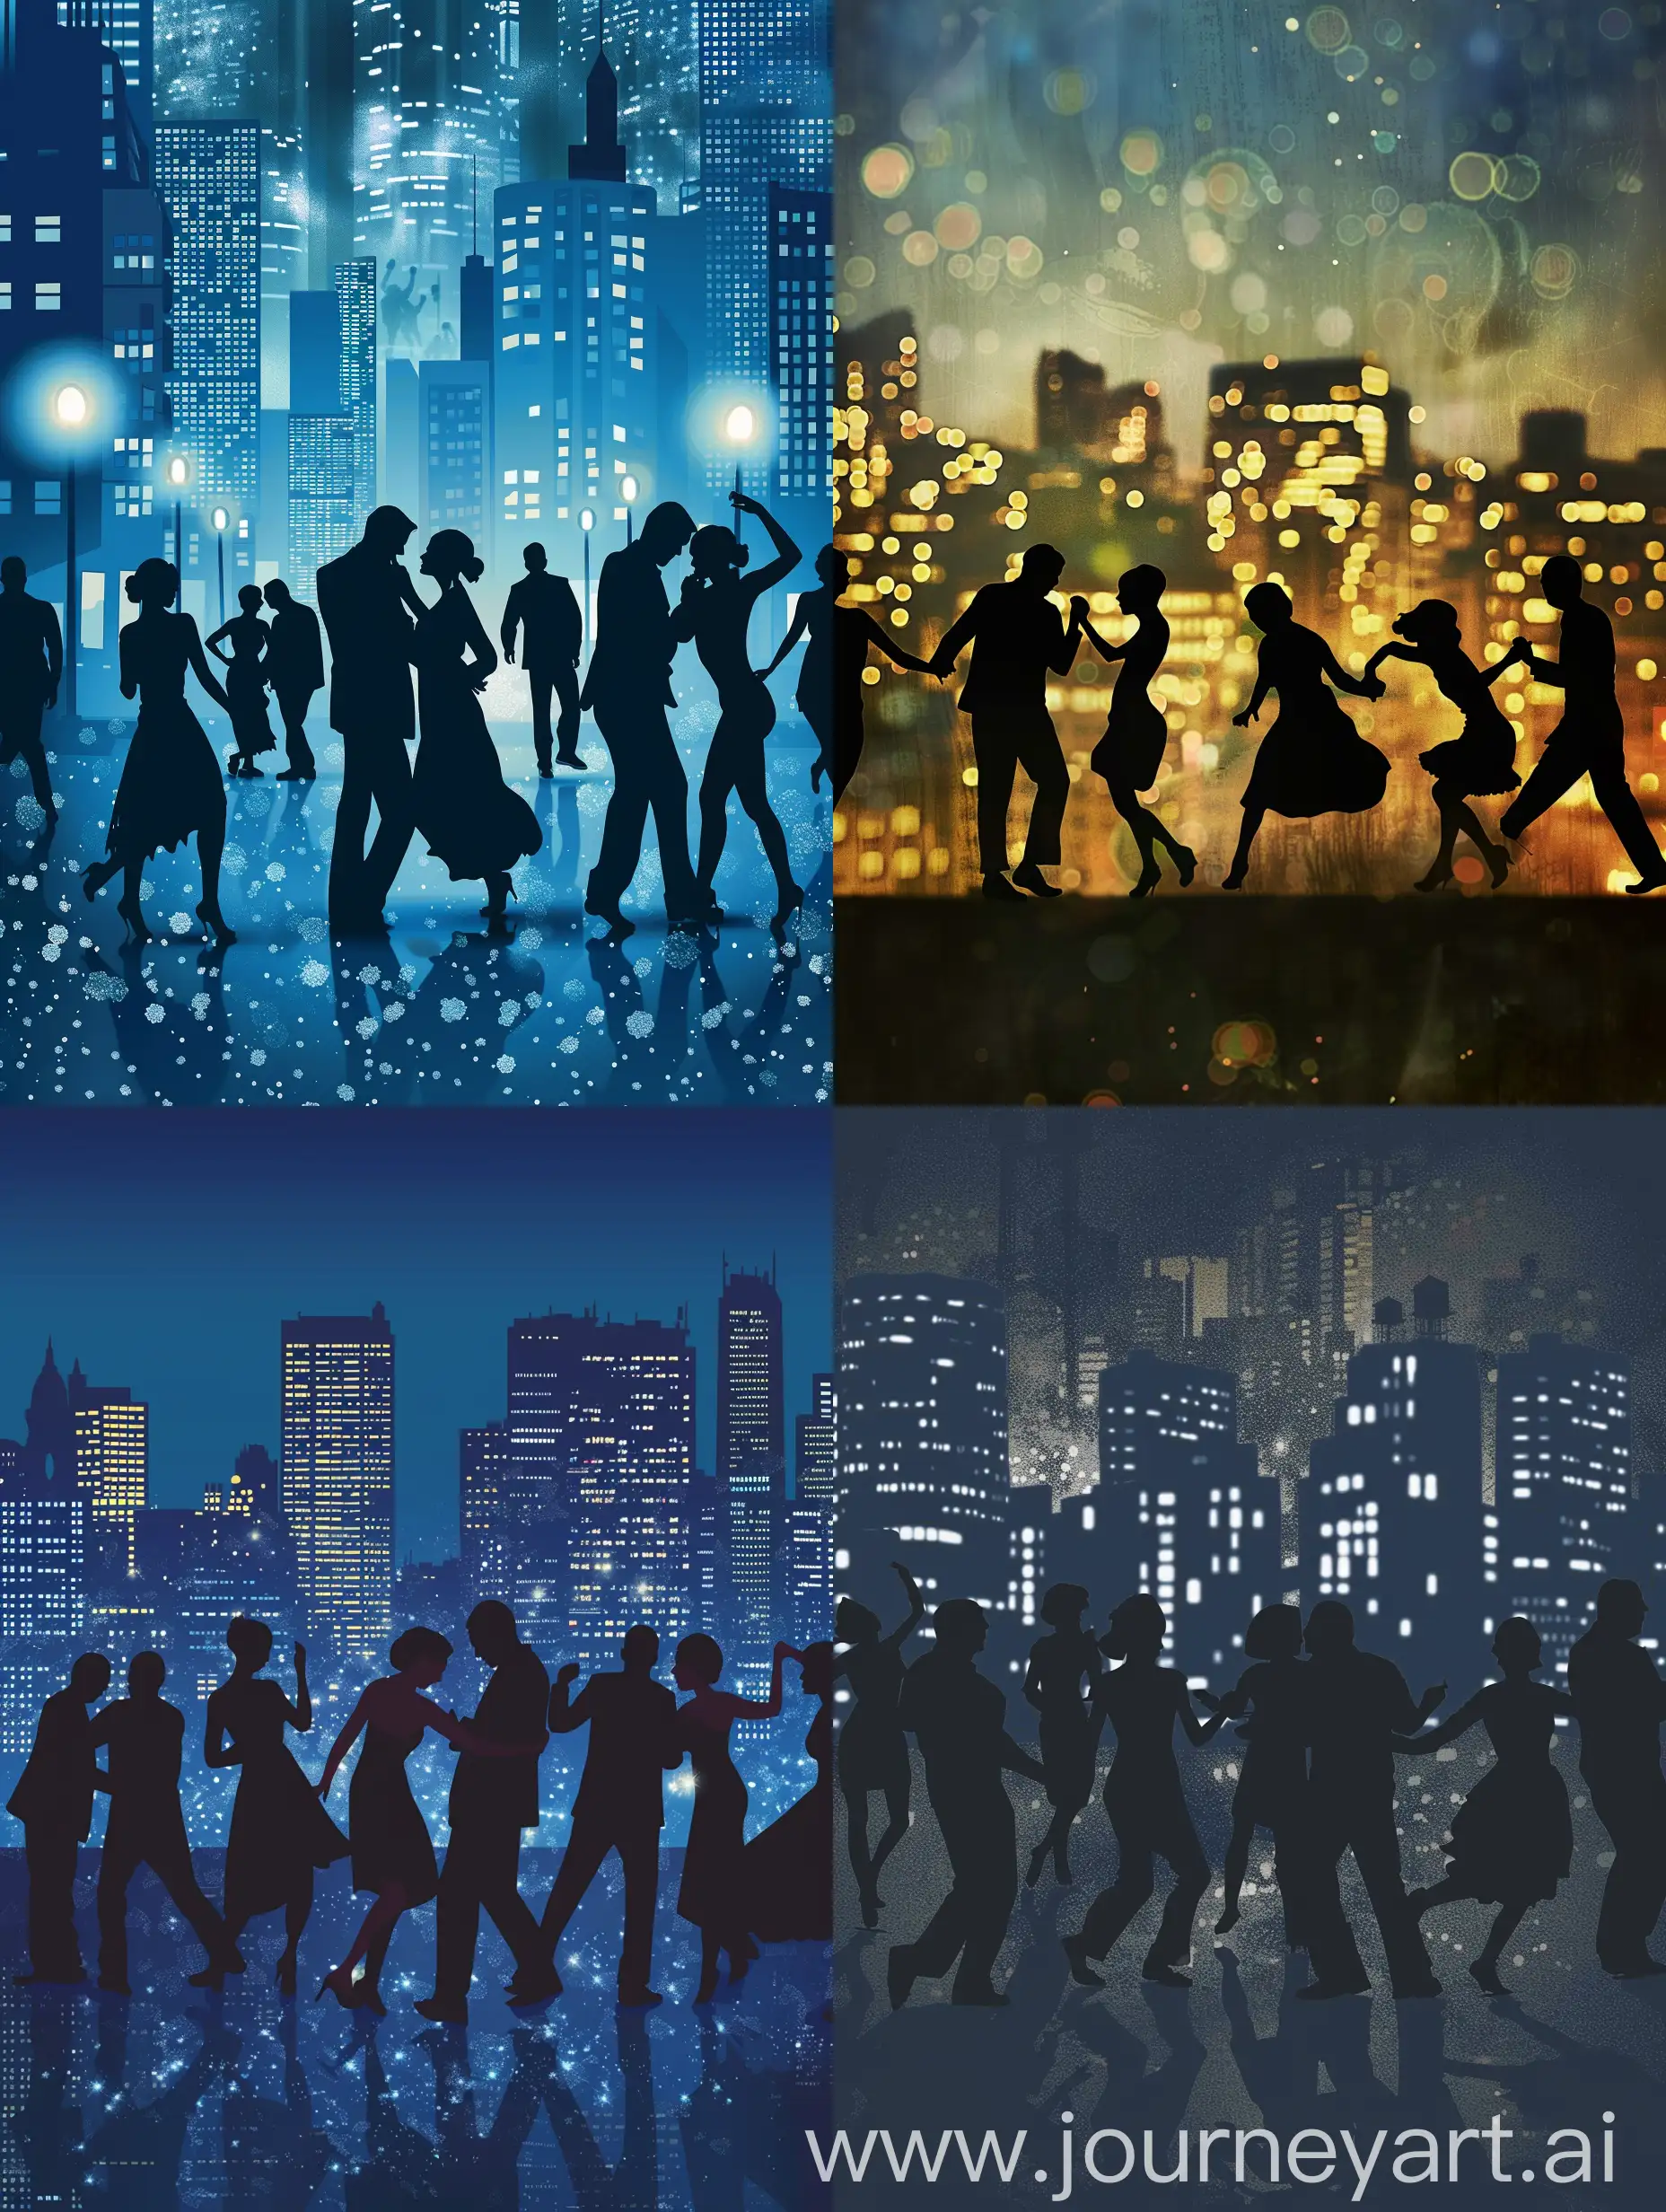 Night-City-Dance-Silhouettes-of-Dancing-People